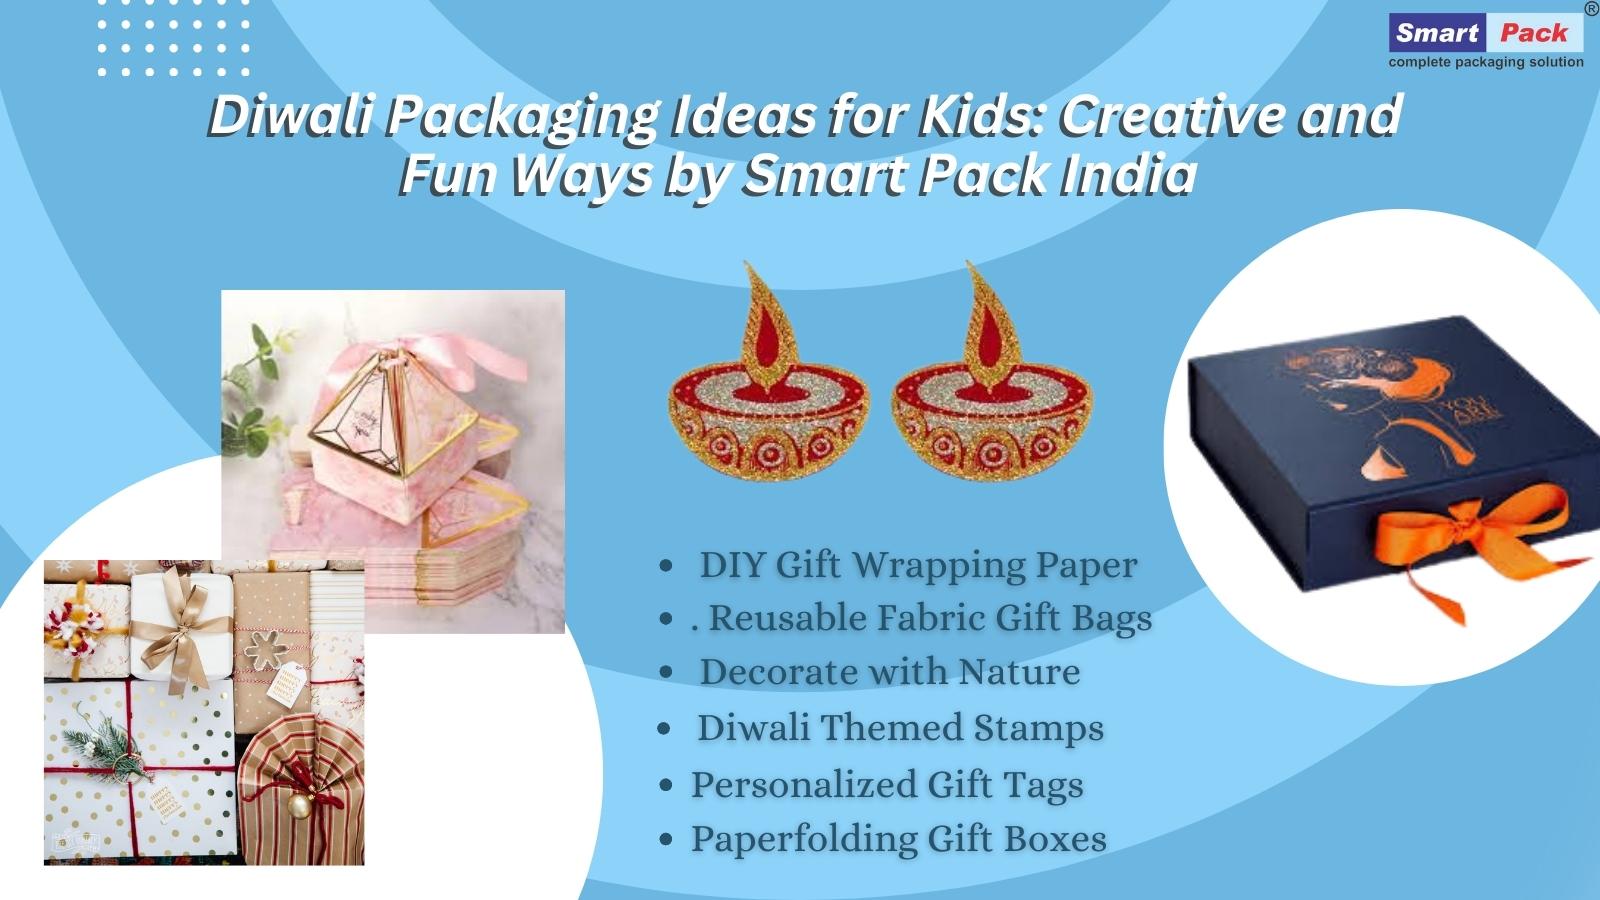 Diwali Packaging Ideas for Kids: Creative and Fun Ways by Smart Pack India